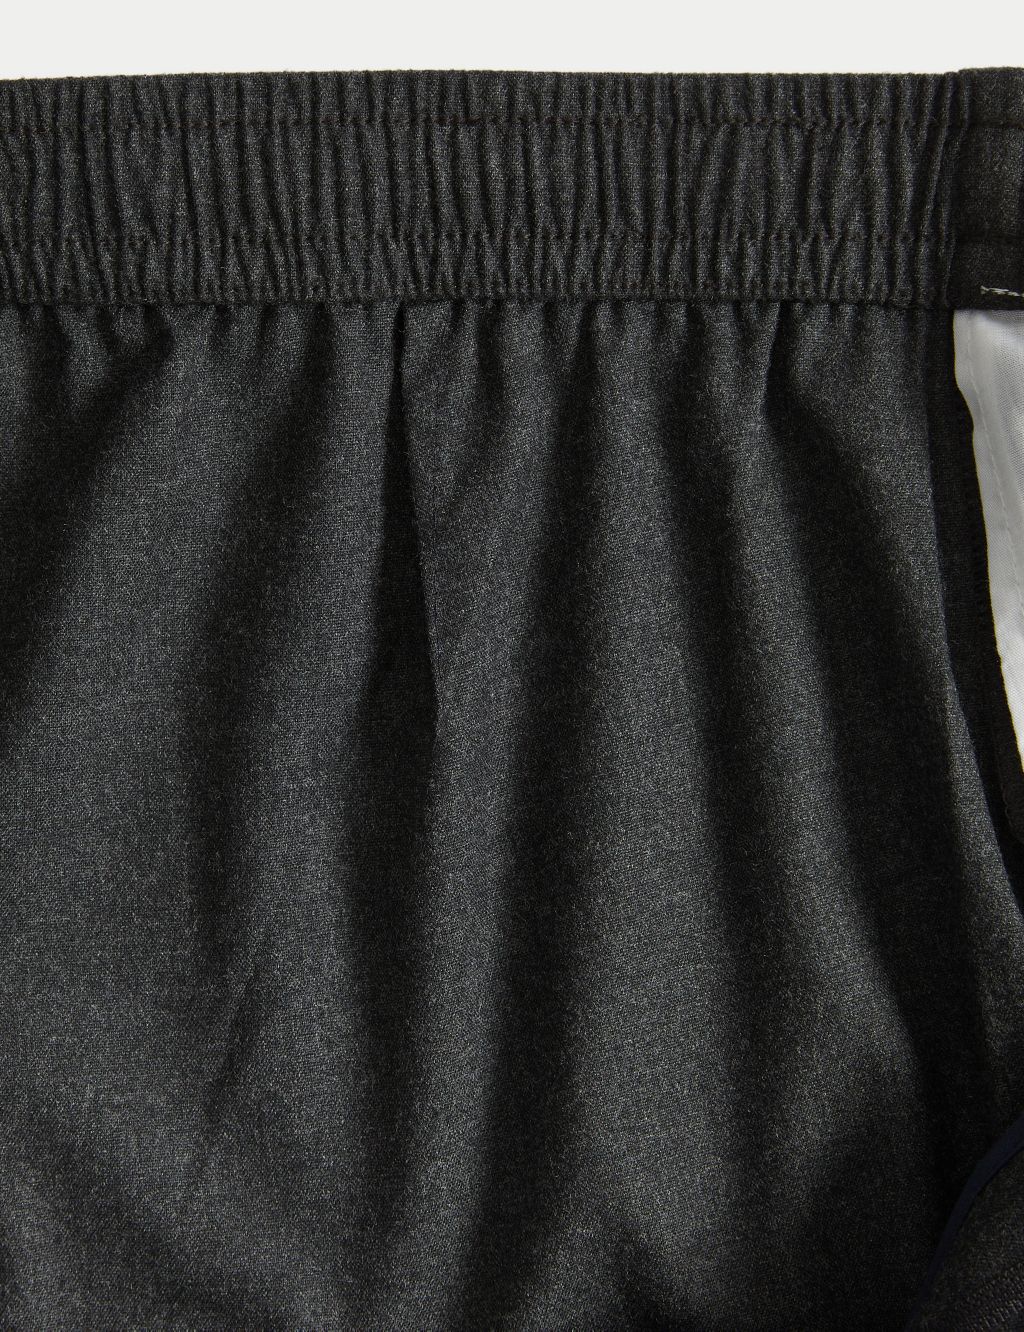 Single Pleat Brushed Stretch Trouser image 7